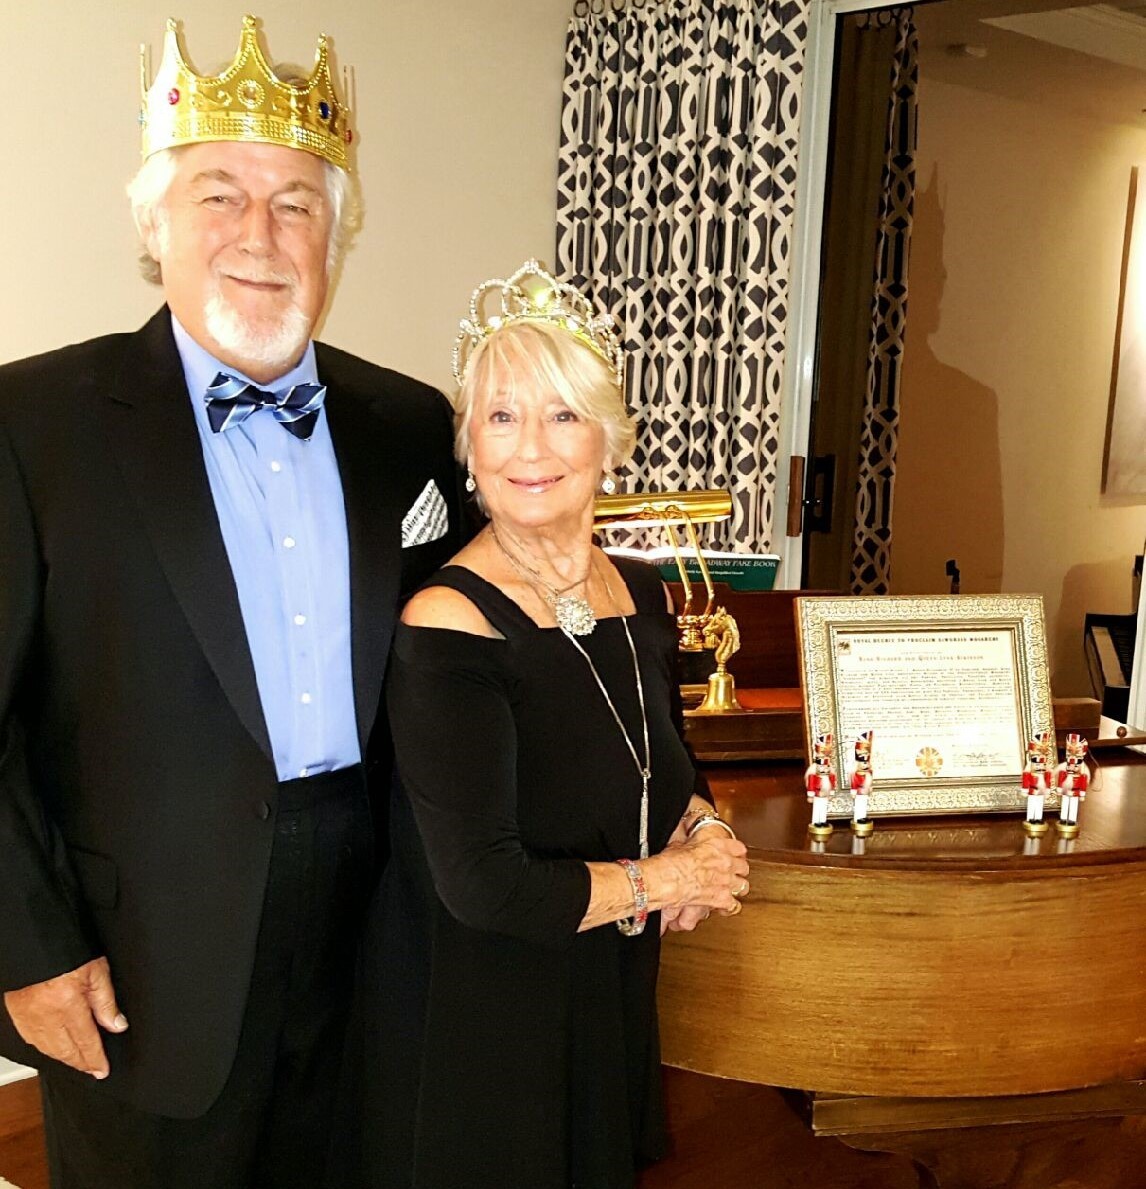 “King Richard” and “Queen Lynn” Atkinson were proclaimed monarchs of Sawgrass at a recent party held at Whiskey Jax.